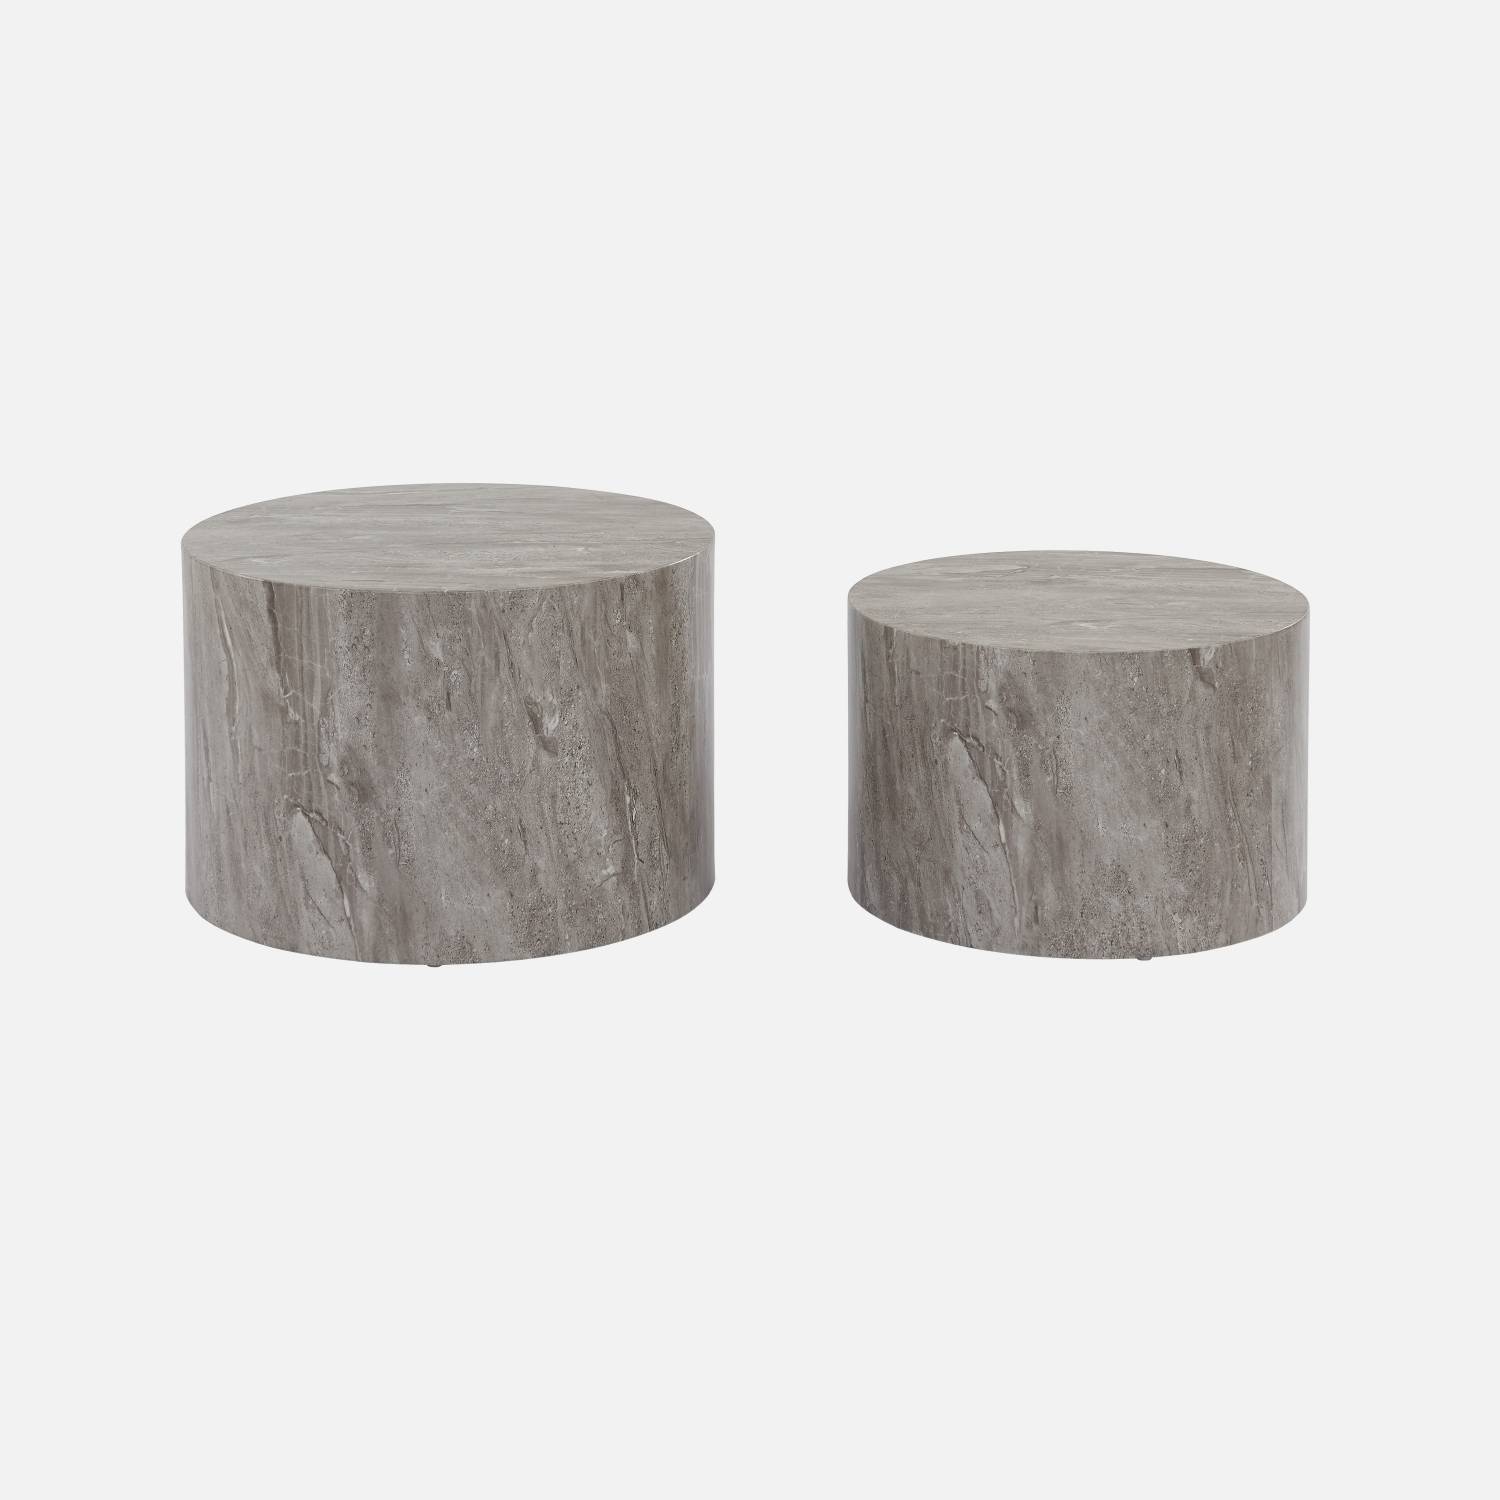 Set of 2 round marble-effect nesting coffee tables, grey l sweeek